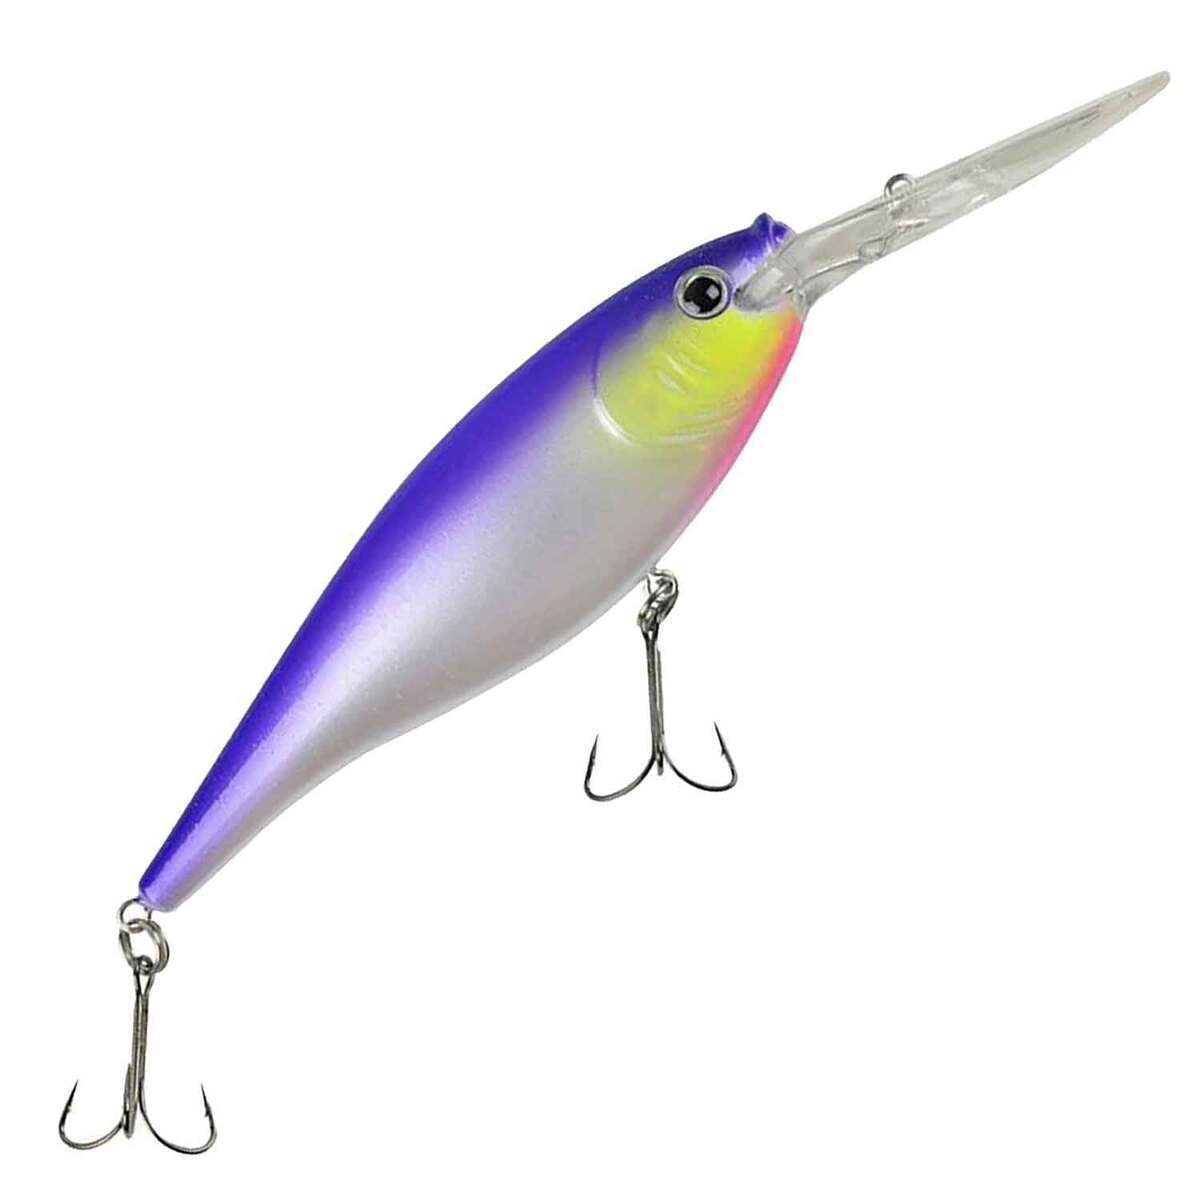 Renegade Outdoor Innovations - We have JOINTED and SHALLOW BERKLEY FLICKER  SHADS ROI custom painted but in limited supply. They will be ready for the  Fargo North Dakota Ice Show. First come